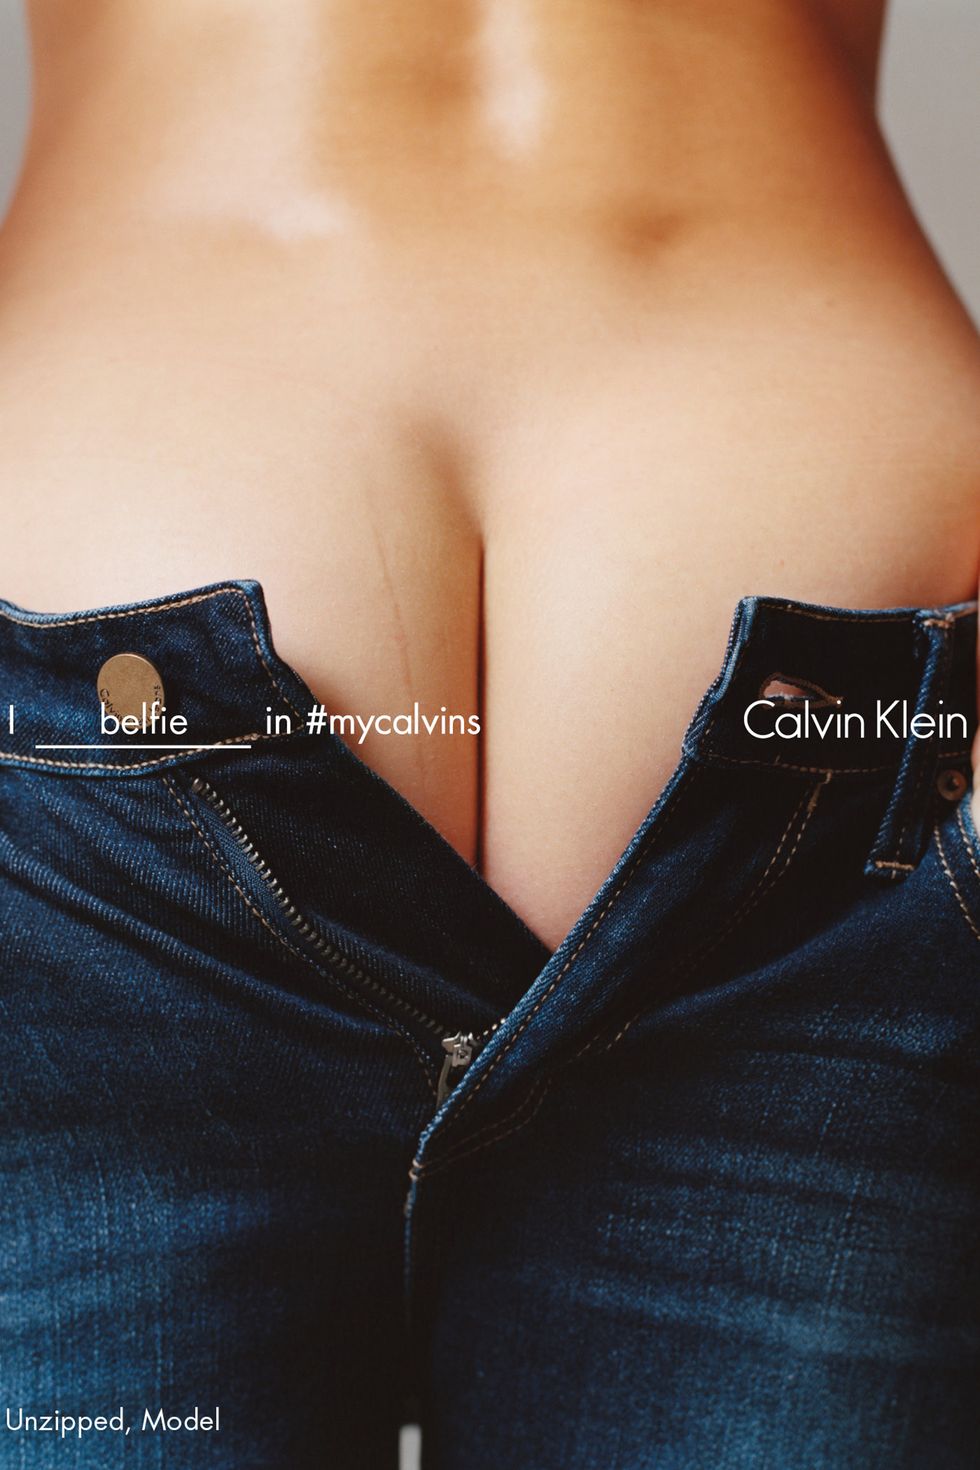 Calvin Klein's latest #mycalvins ad causes controversy